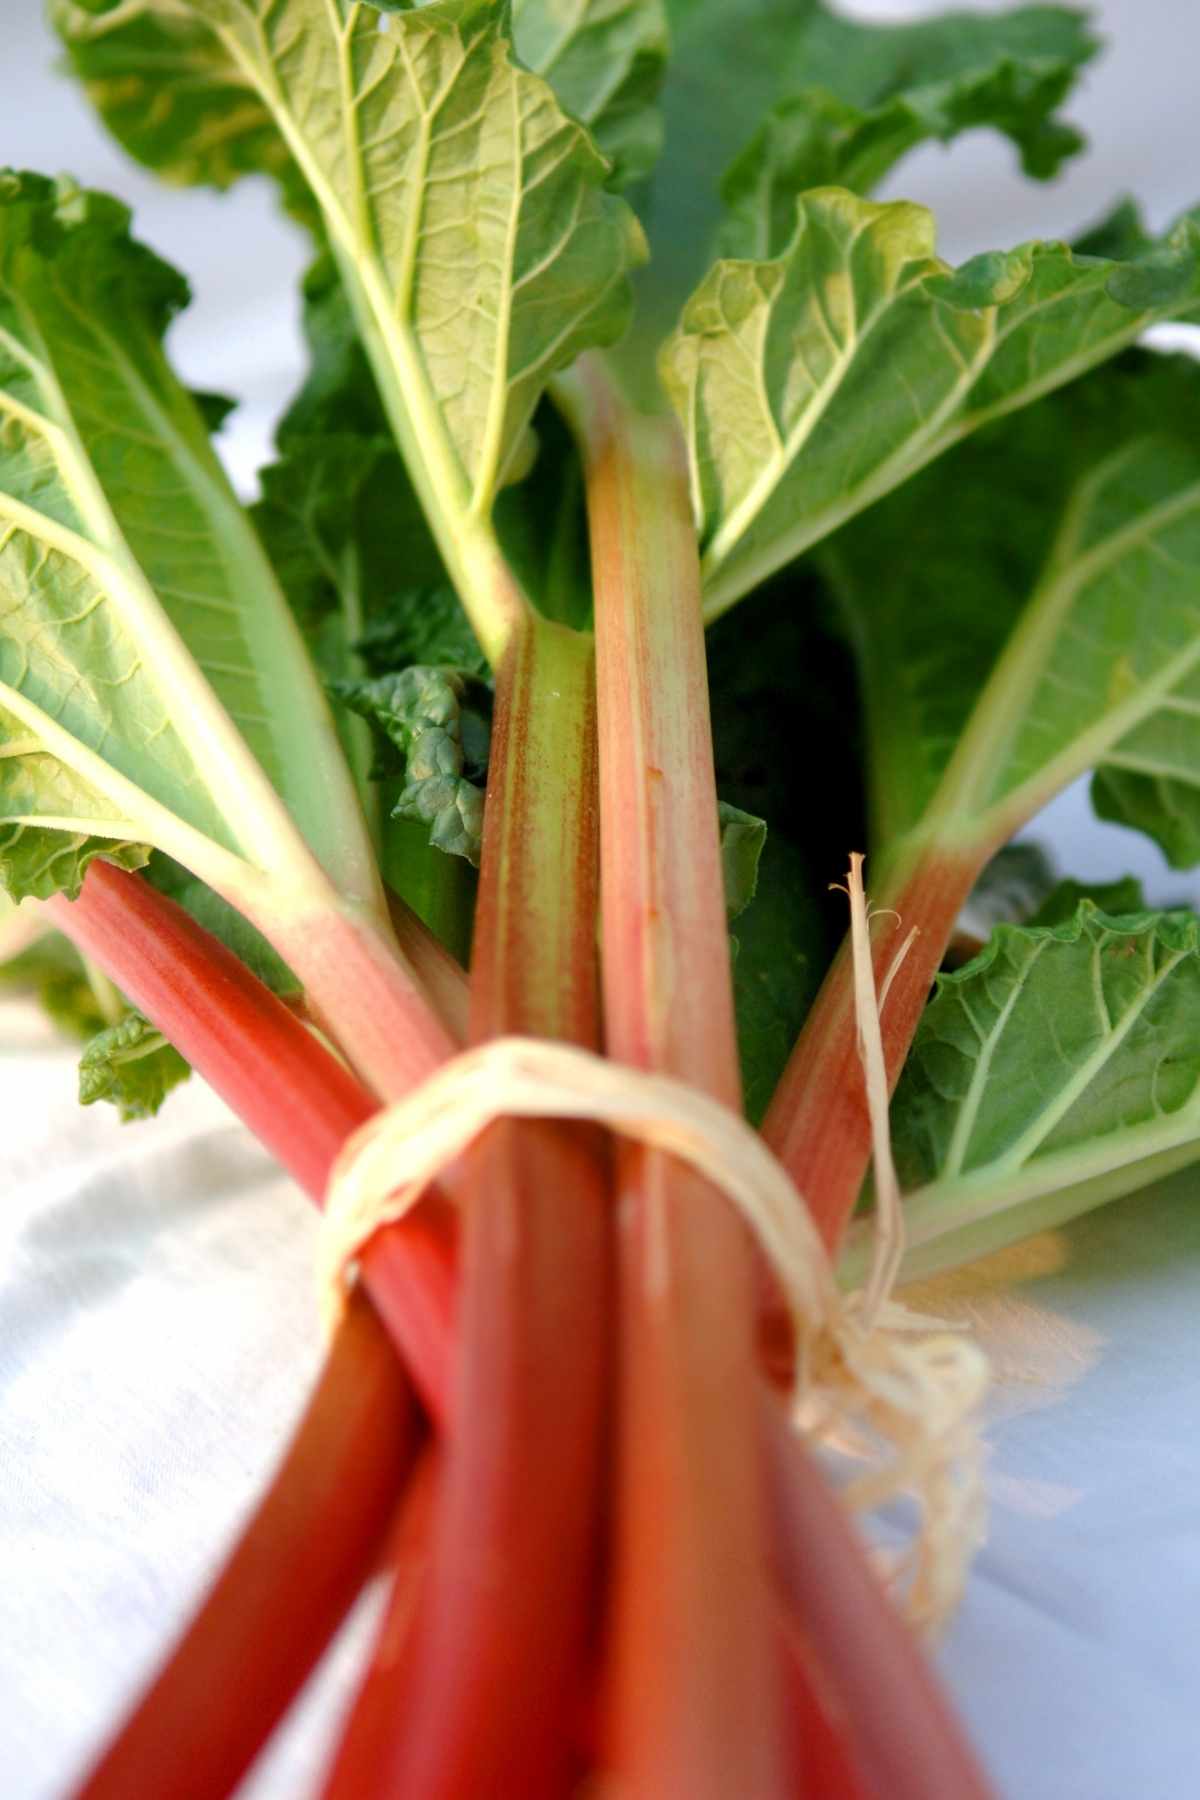 The pinky-green appearance of rhubarb makes it look like colorful celery. Although it might be most popular in a variety of desserts, its tart, sweet, sour and tangy flavor is not limited to only sweet dishes. It’s actually a bit saddening that this vegetable is nicknamed “pie plant” as it has so much more to offer.